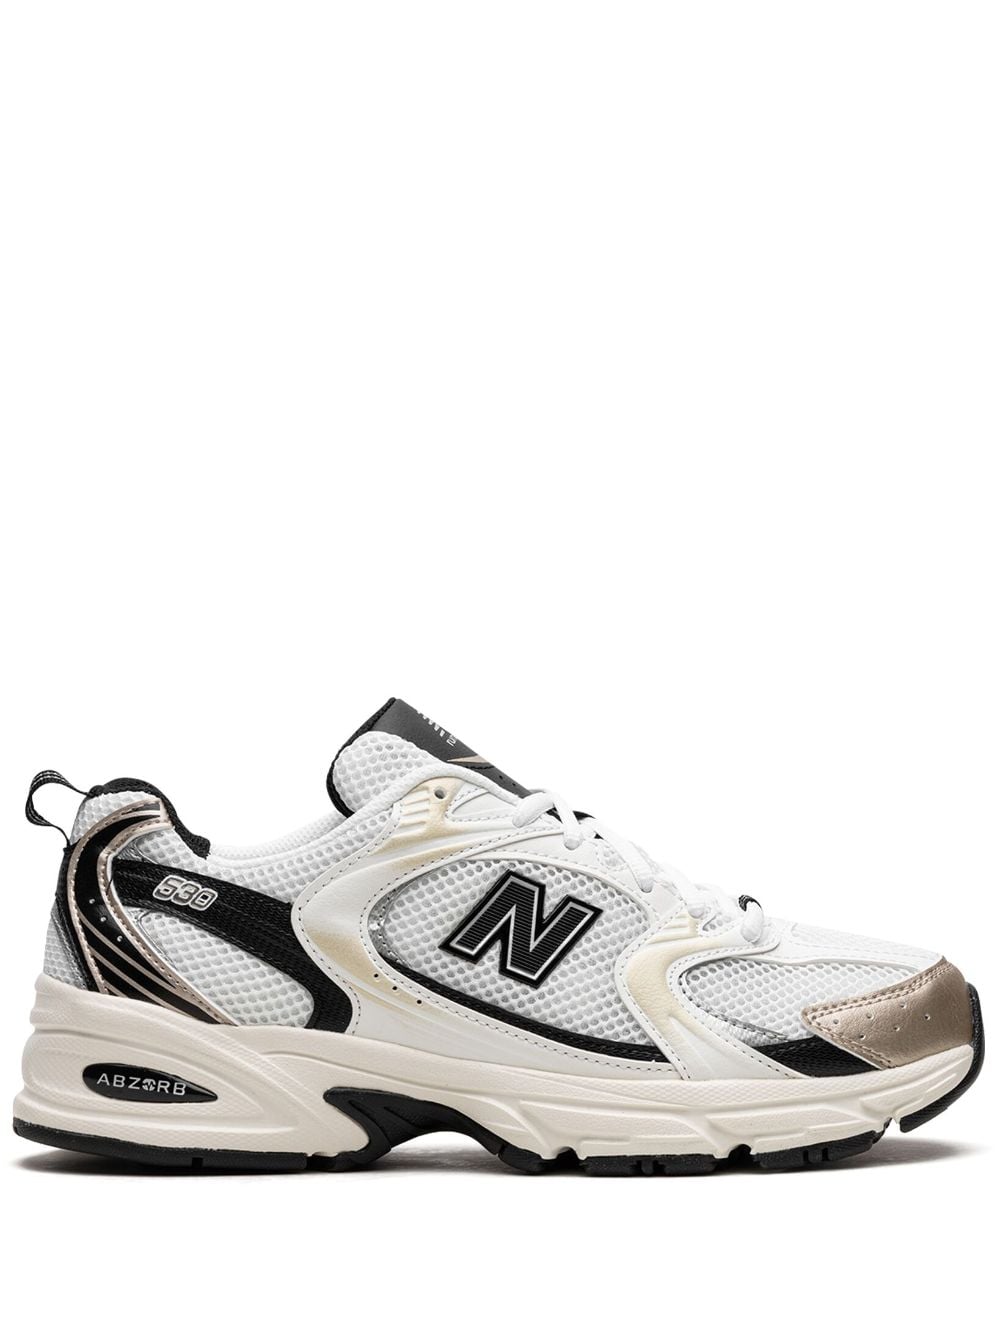 New Balance 530 "White Beige" low-top sneakers